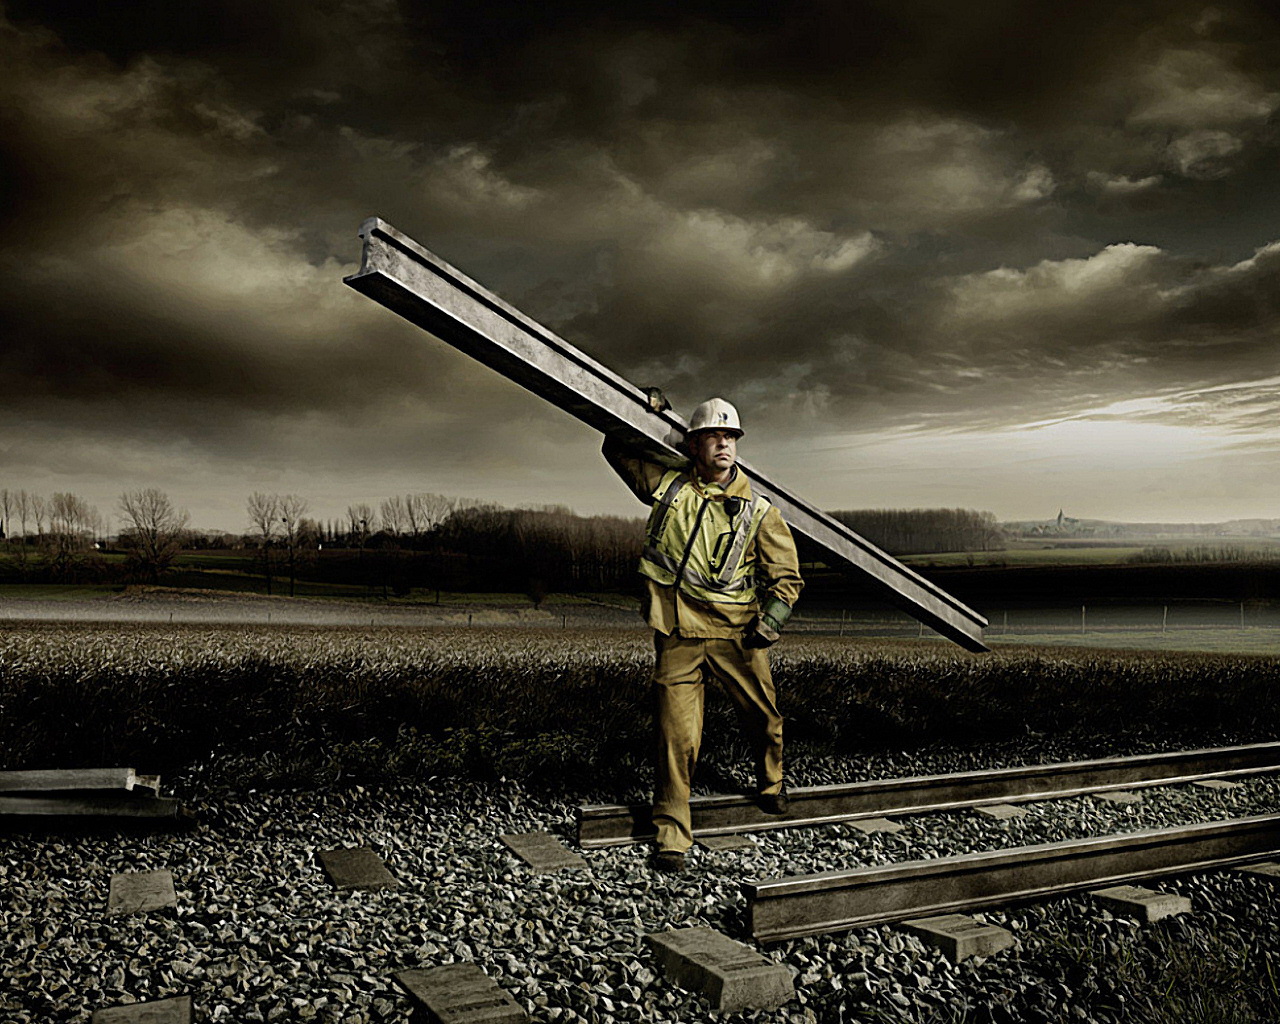 Download full size Working with the rail Digital Art wallpaper / 1280x1024